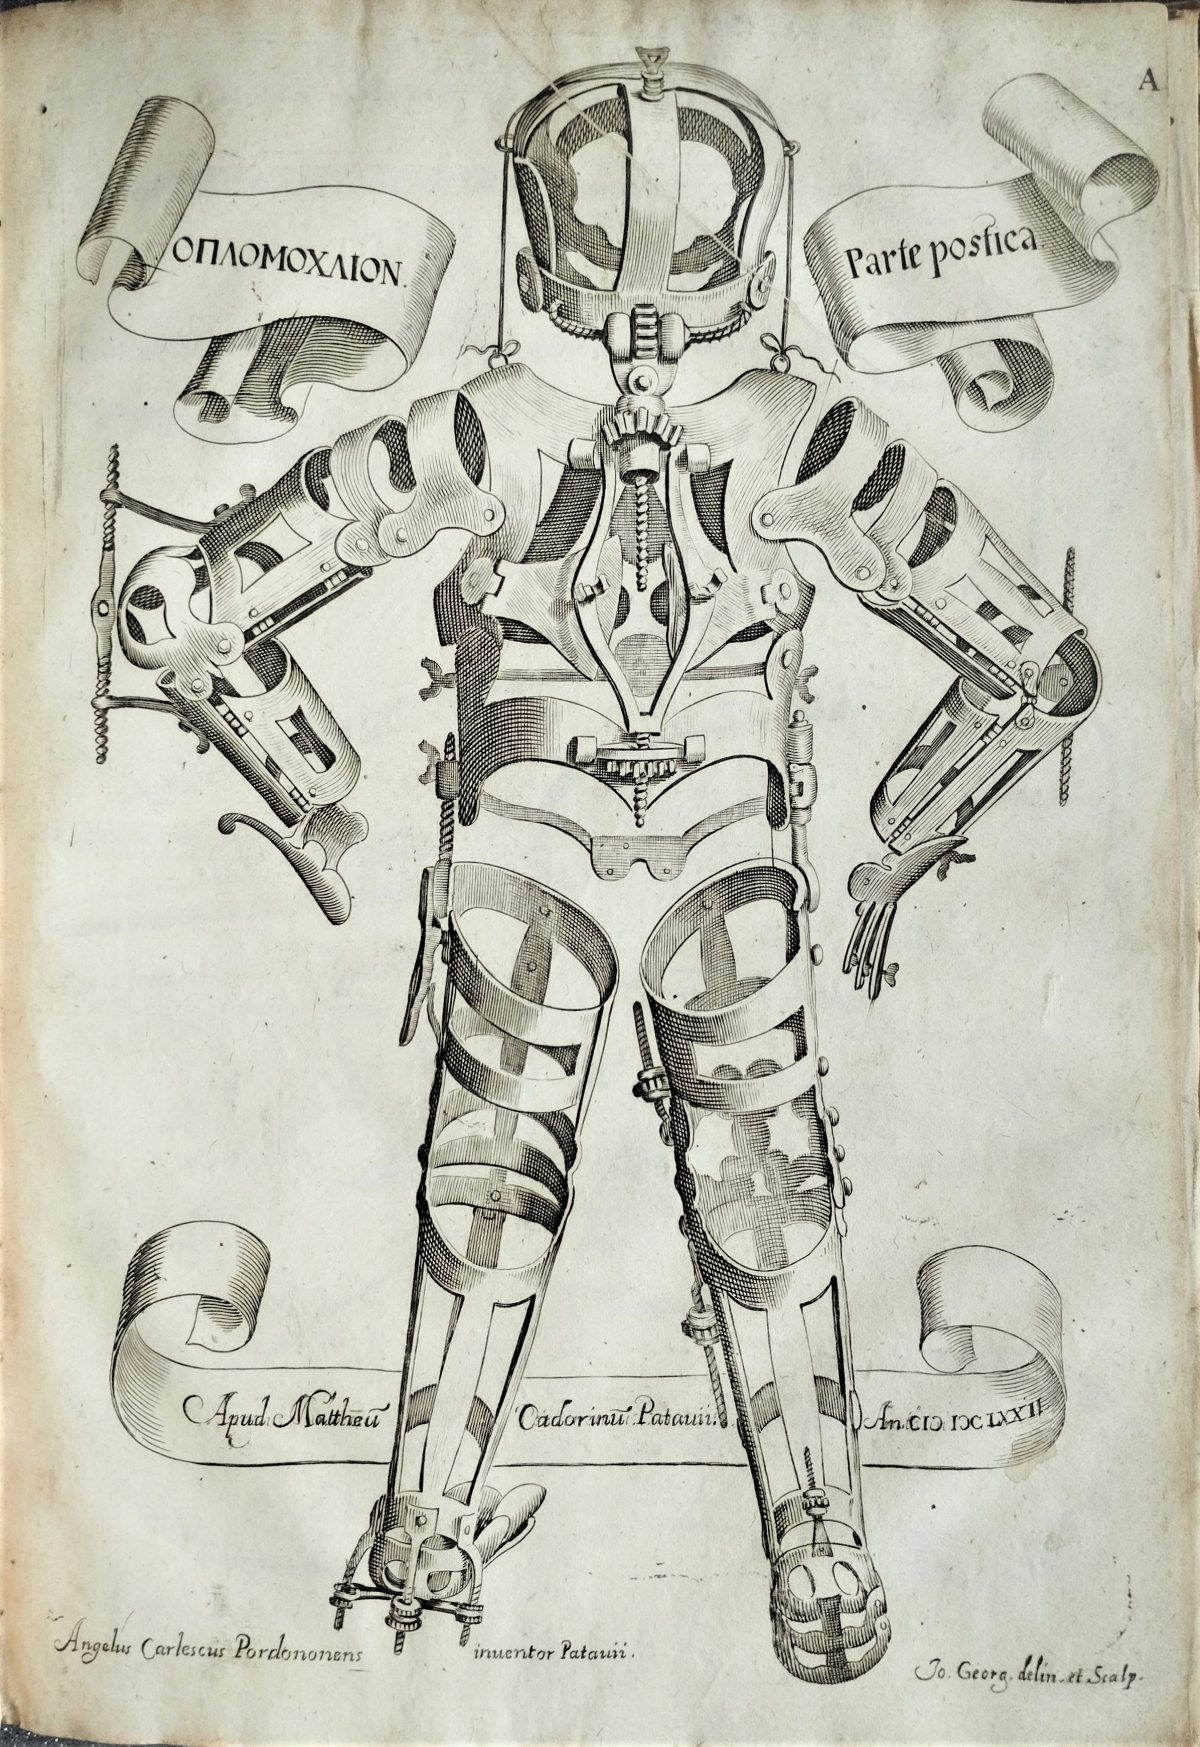 Engraved illustration of a complete suit of jointed metal orthopaedic braces, viewed from the back.